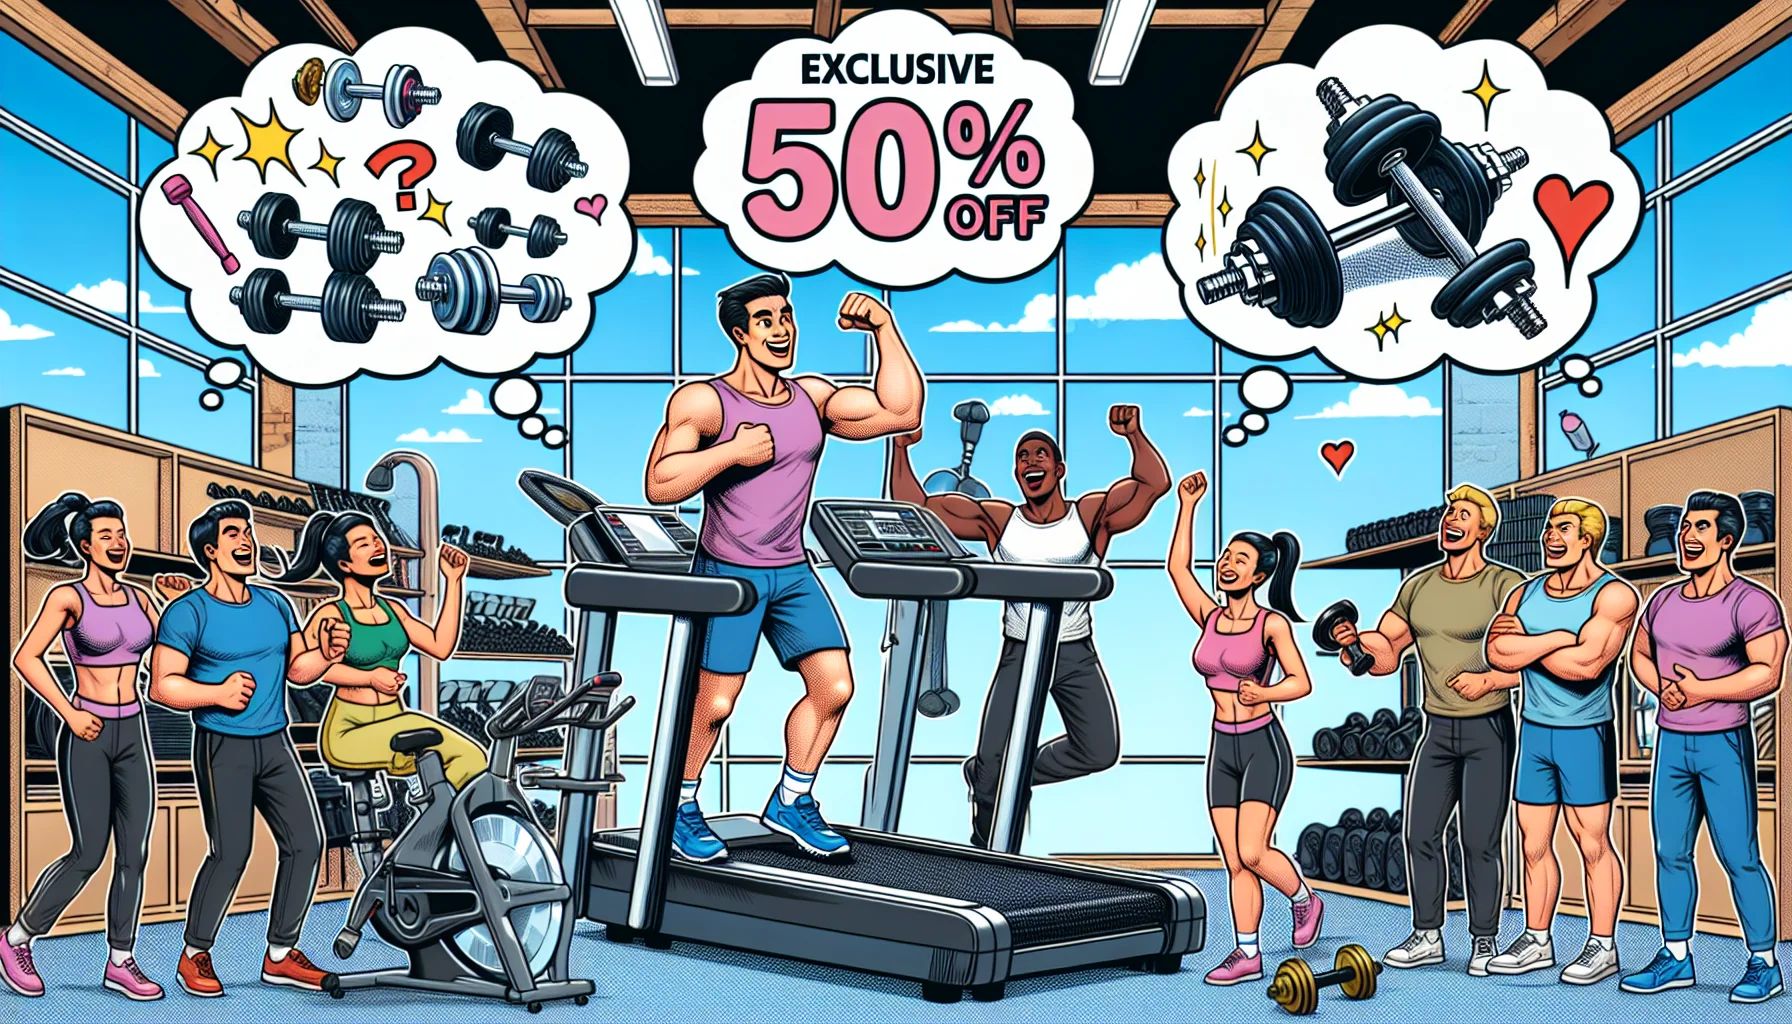 Create a humorous and captivating image of a scenario at a fitness equipment store. In the midst of the store, a treadmill, an exercise bike, and a set of dumbbells are marked down 50% and spotlighted. Various customers, an Asian woman, a Hispanic man, a Black woman, and a White man, laugh and cheer as they try different fitness gear. Next to each person, show exercise related comic style thought bubbles indicating fun ideas of how they would use the exercise gear at home. In the sky above the store, an unseen giant hand puts up a banner reading 'Exclusive 50% Off Fitness Essentials'.